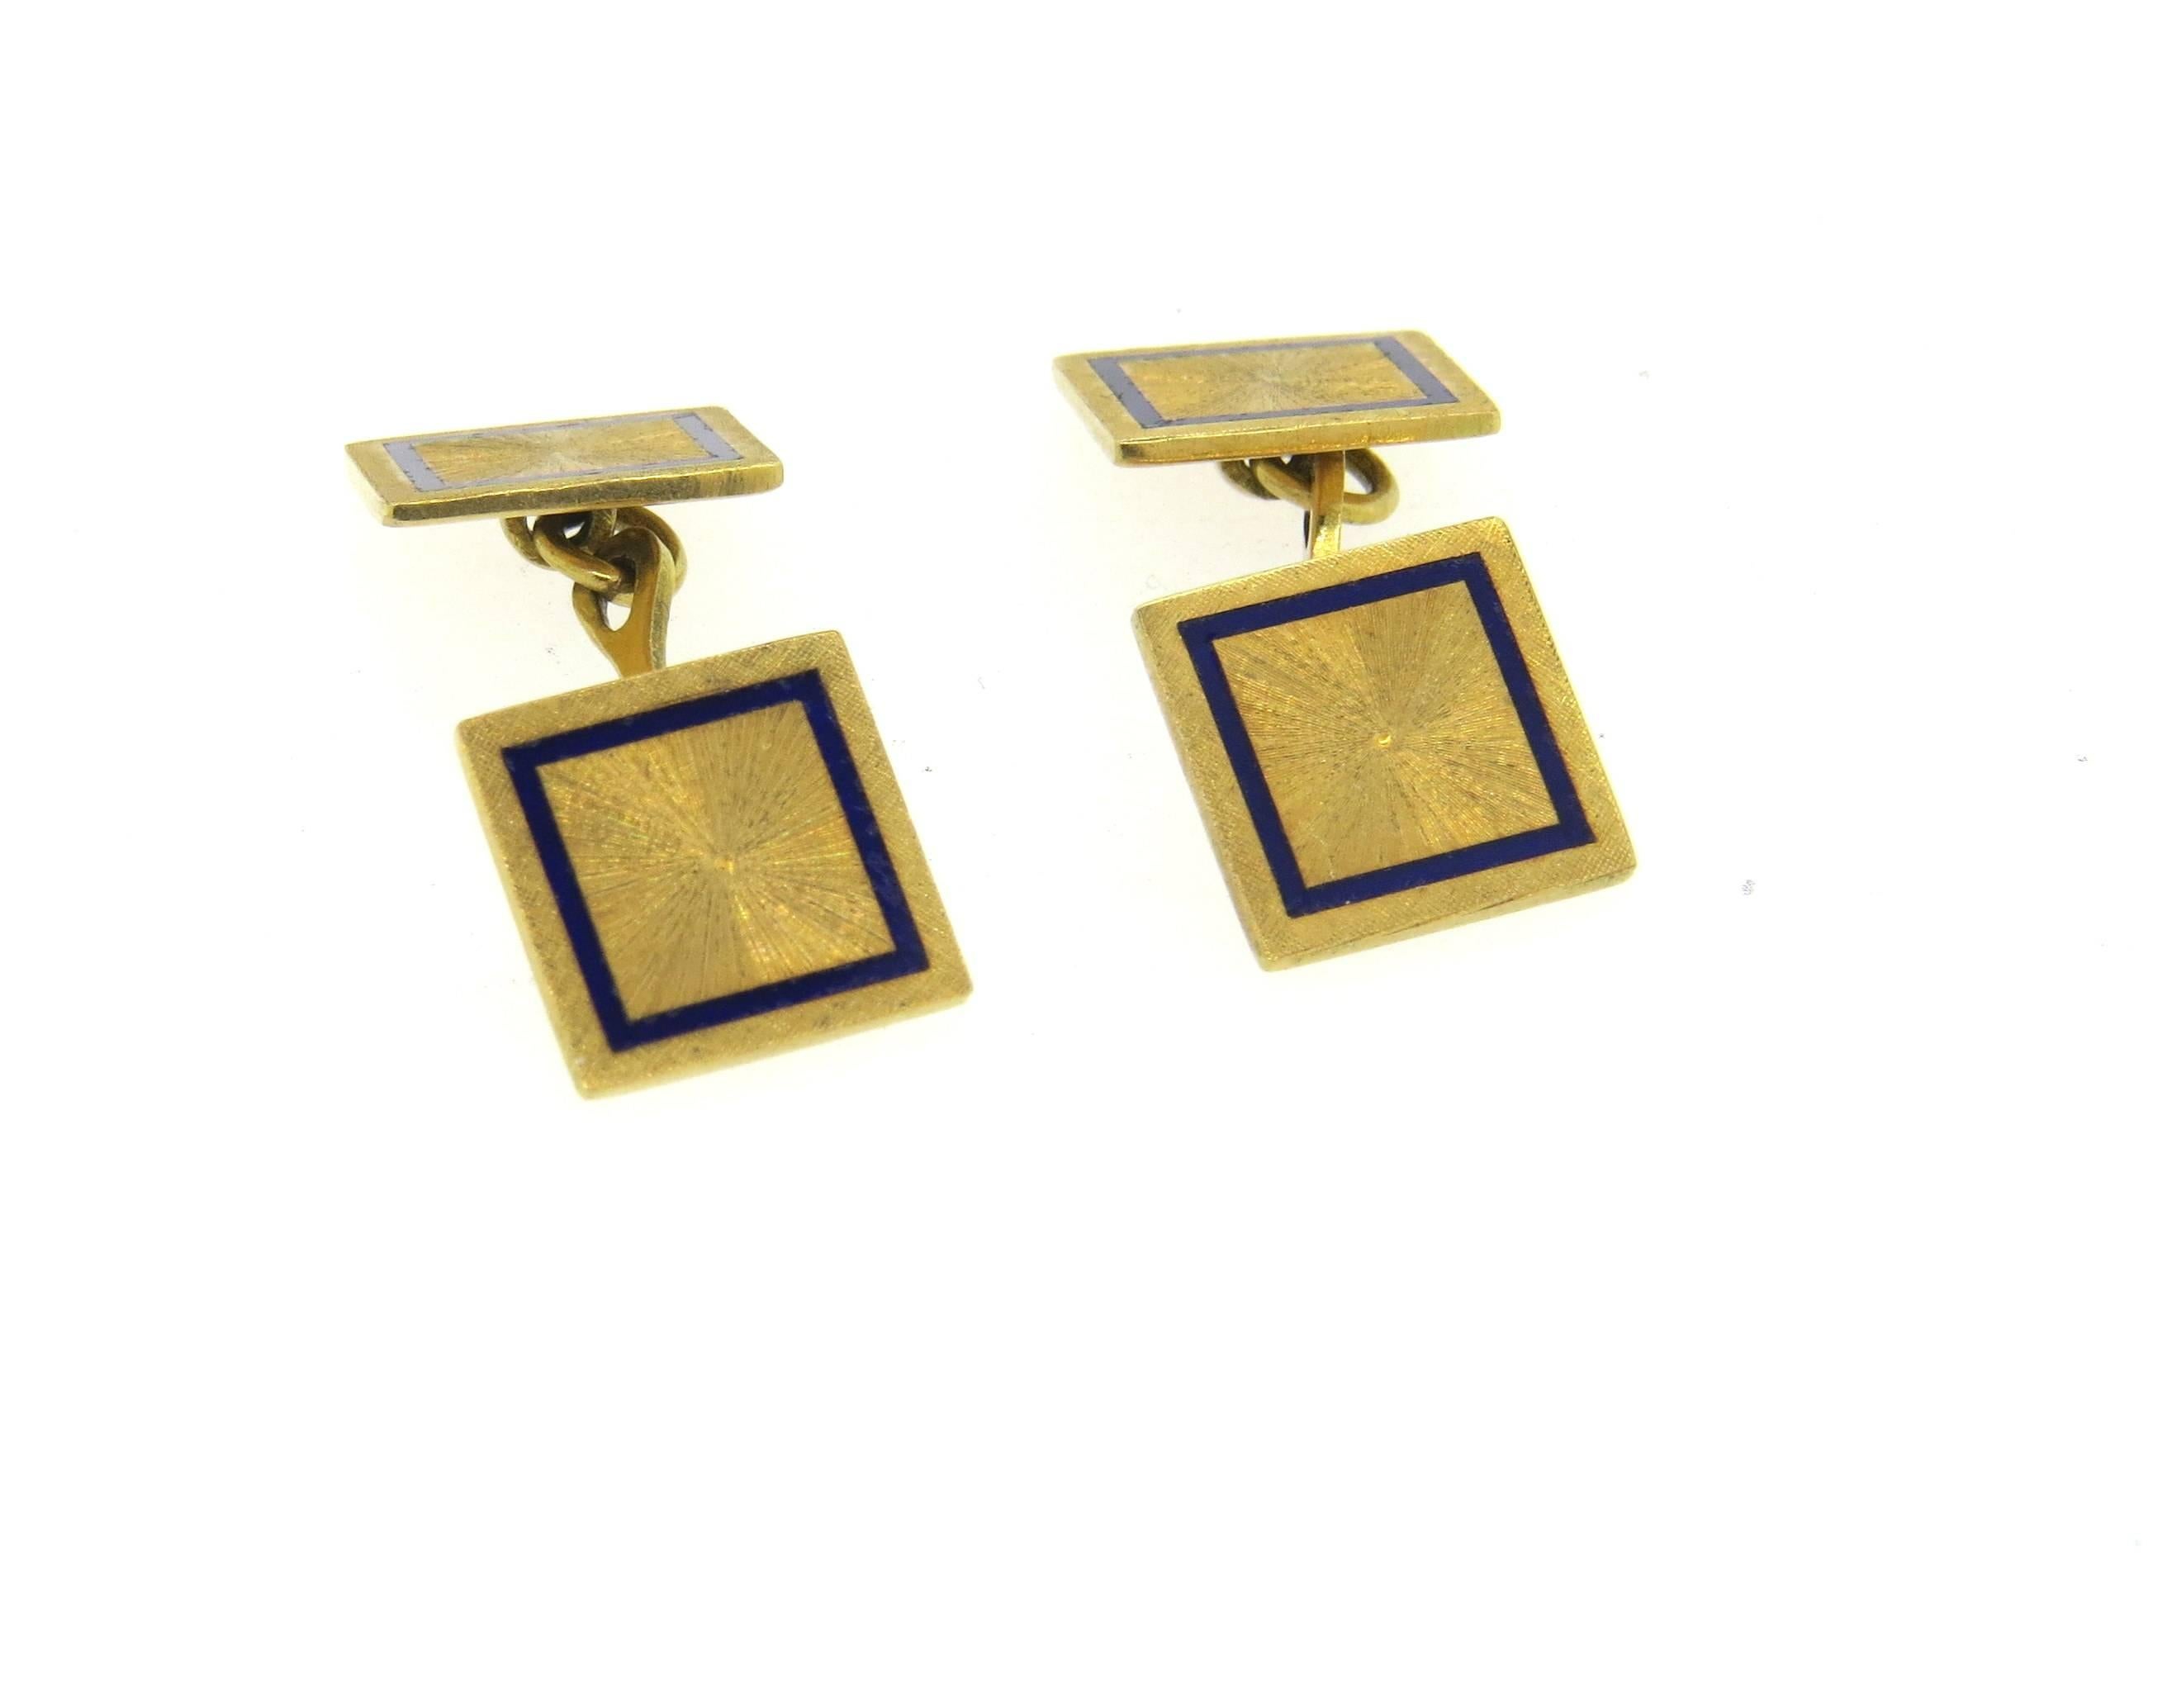 18k yellow gold cufflinks, decorated with blue enamel rim. Each top measures 12.5mm x 12.5mm. Marked 750. Weight - 11.5 grams 